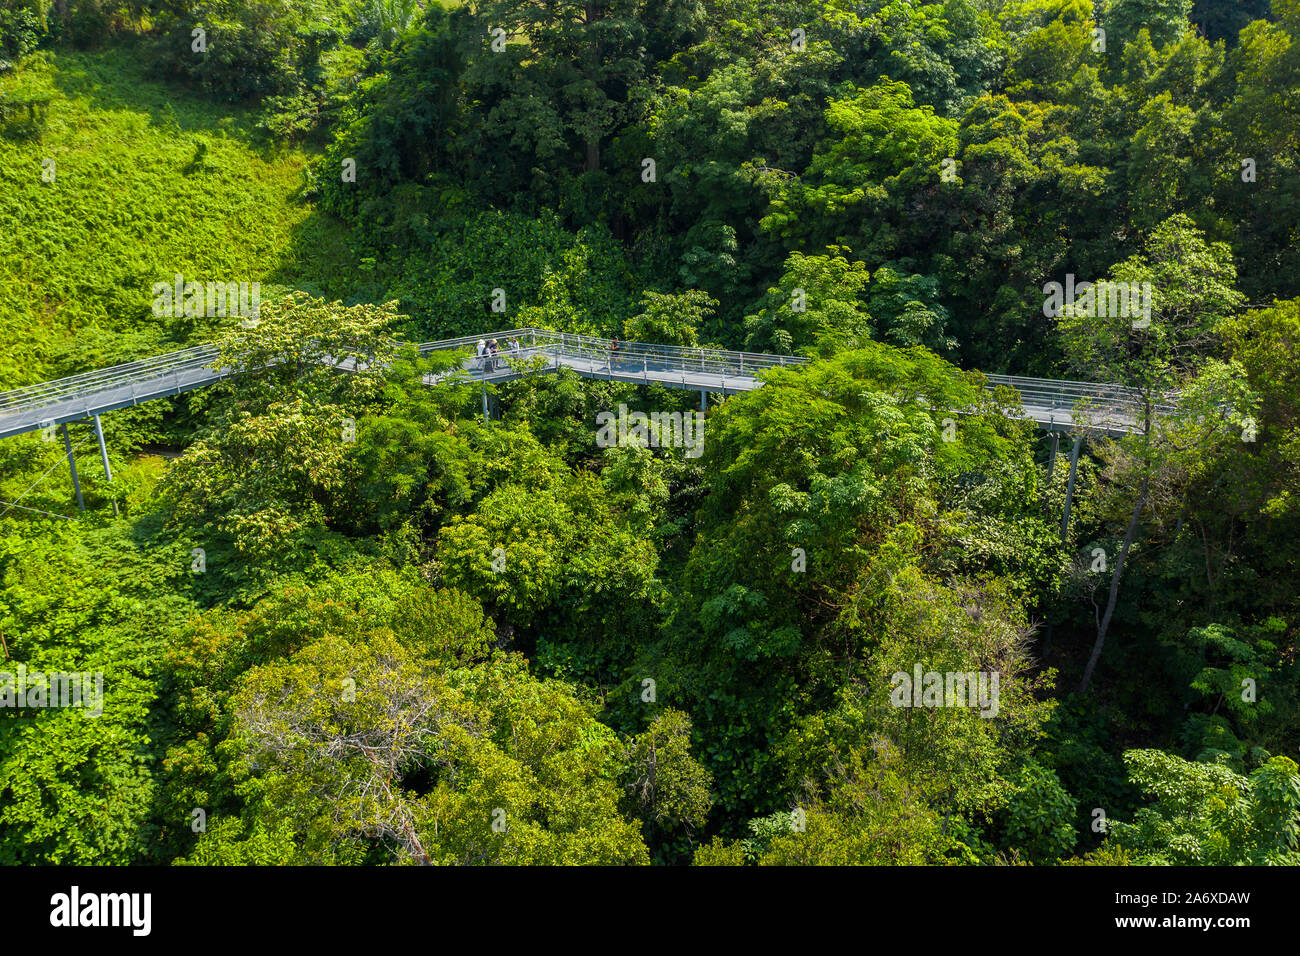 View of Southern Ridges bridges for people to walk and enjoy the beauty of  nature in a garden city, Singapore Stock Photo - Alamy